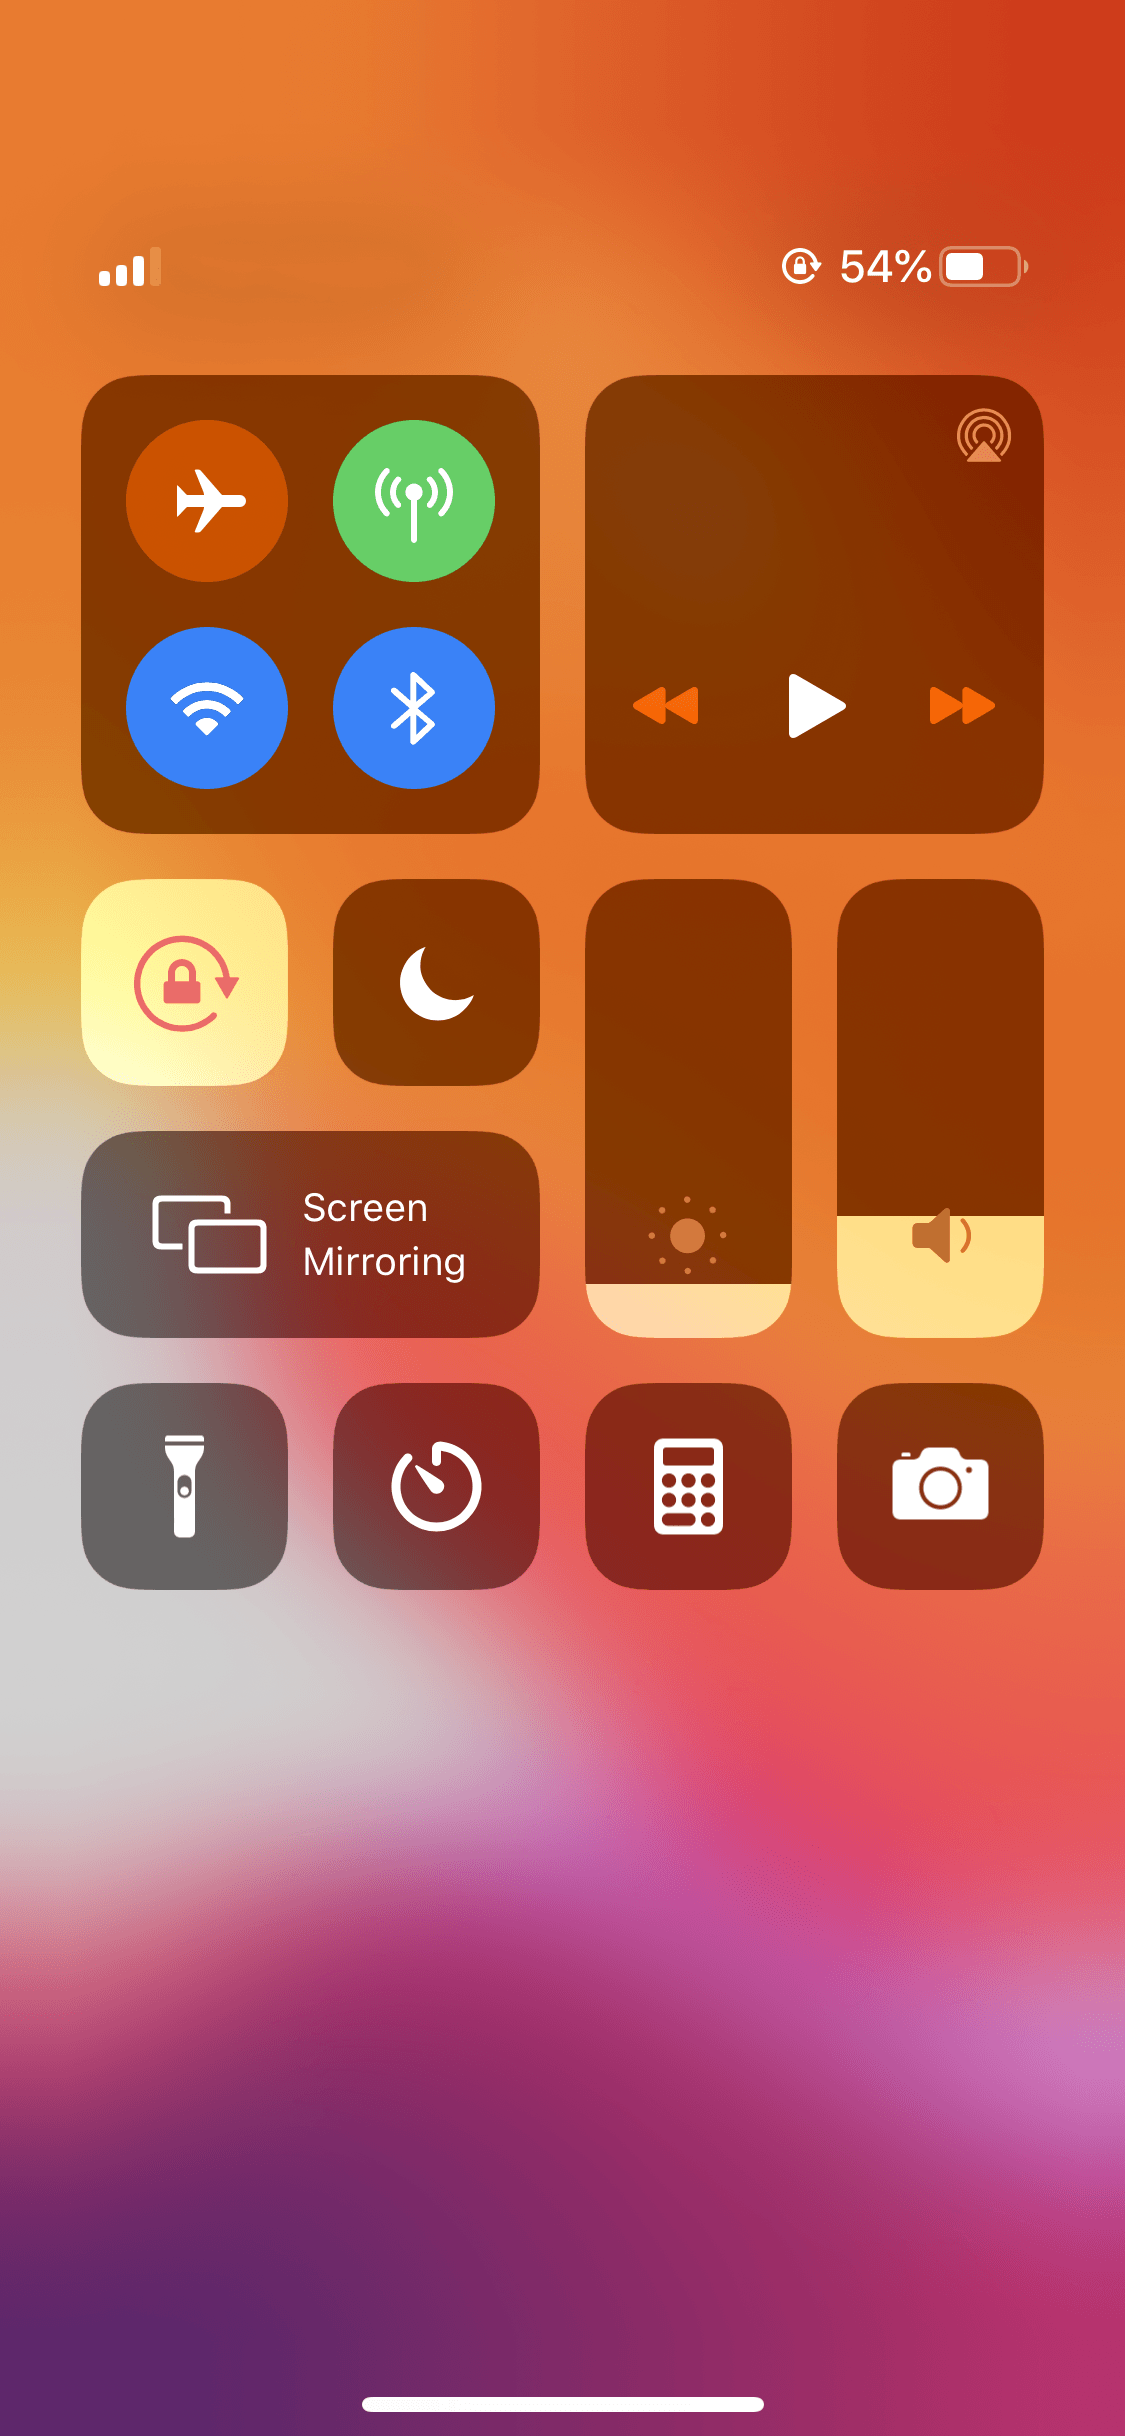 Bluetooth Stuttering Issues on iPhone 11 Pro Max